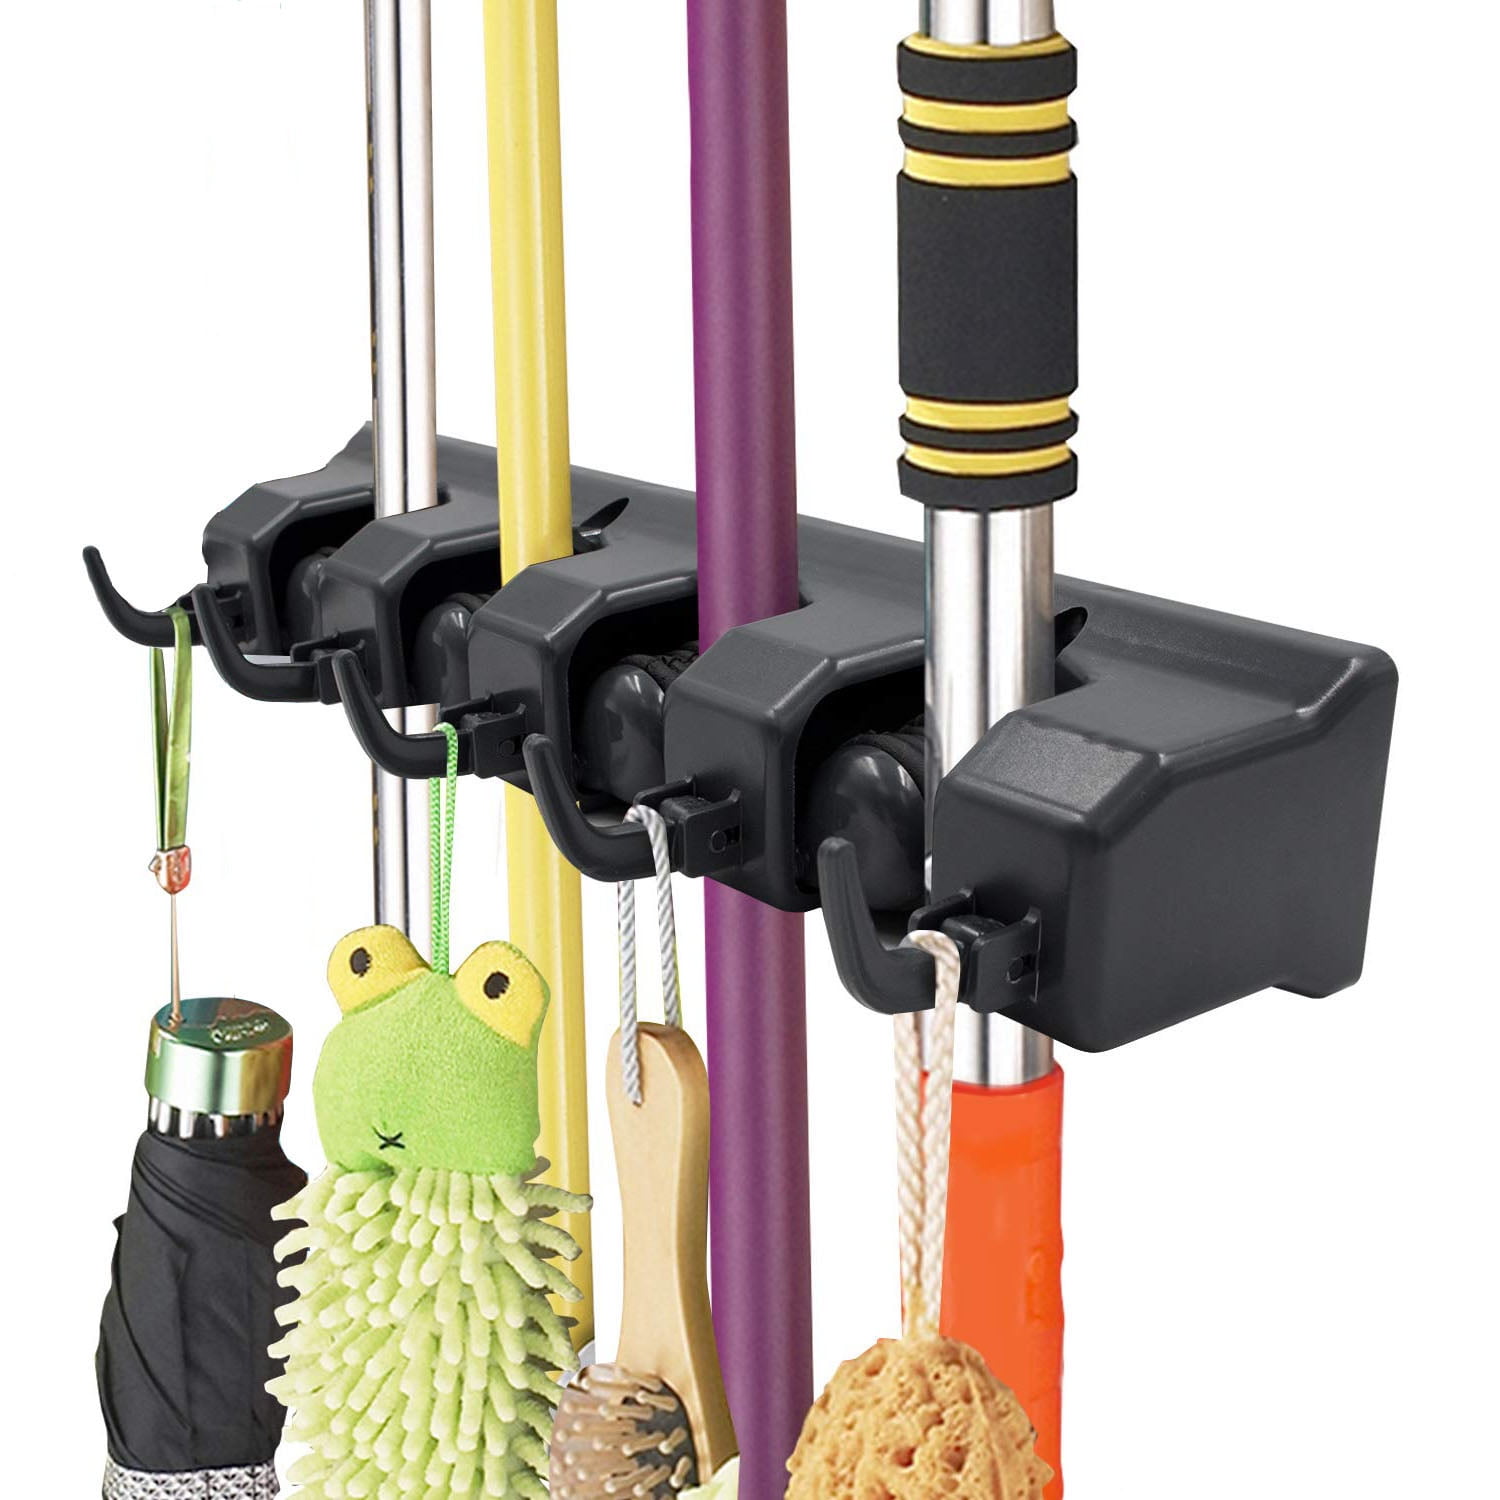 Garden,Bathroom Organization and Storage,4 Cards 5 Hanging NXM Broom Mop Holder Wall Mounted Storage Organizer Tool Mop Broom Holder Broom Holder Wall Mounted for Kitchen Garage